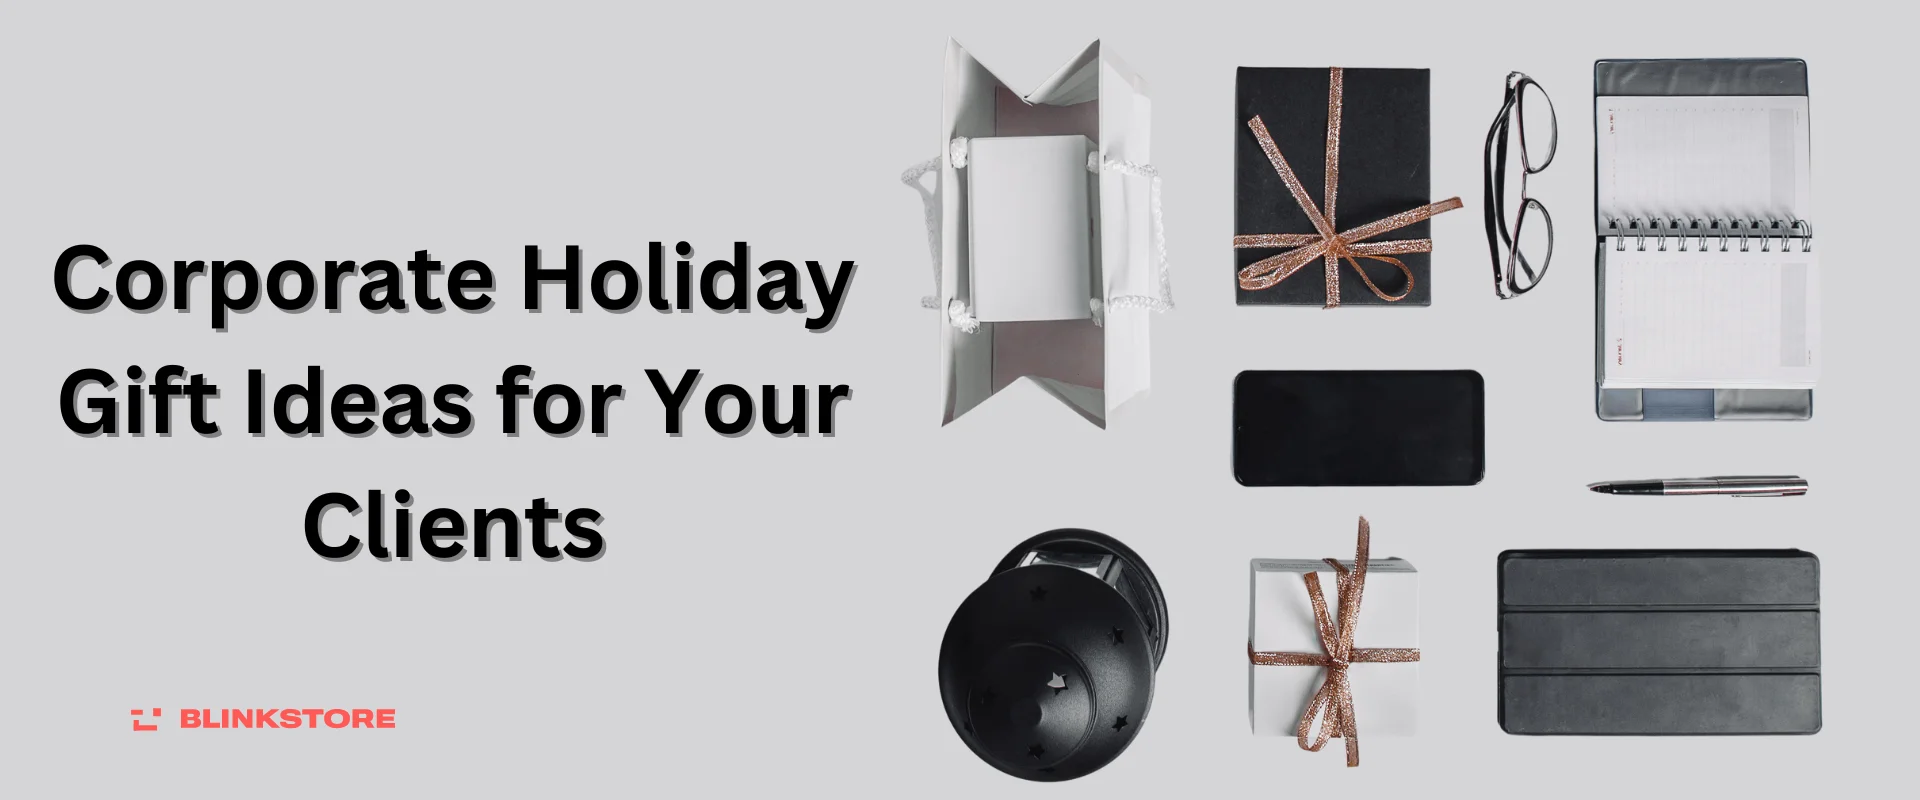 Affordable 20 Corporate Holiday Gift Ideas for your Clients